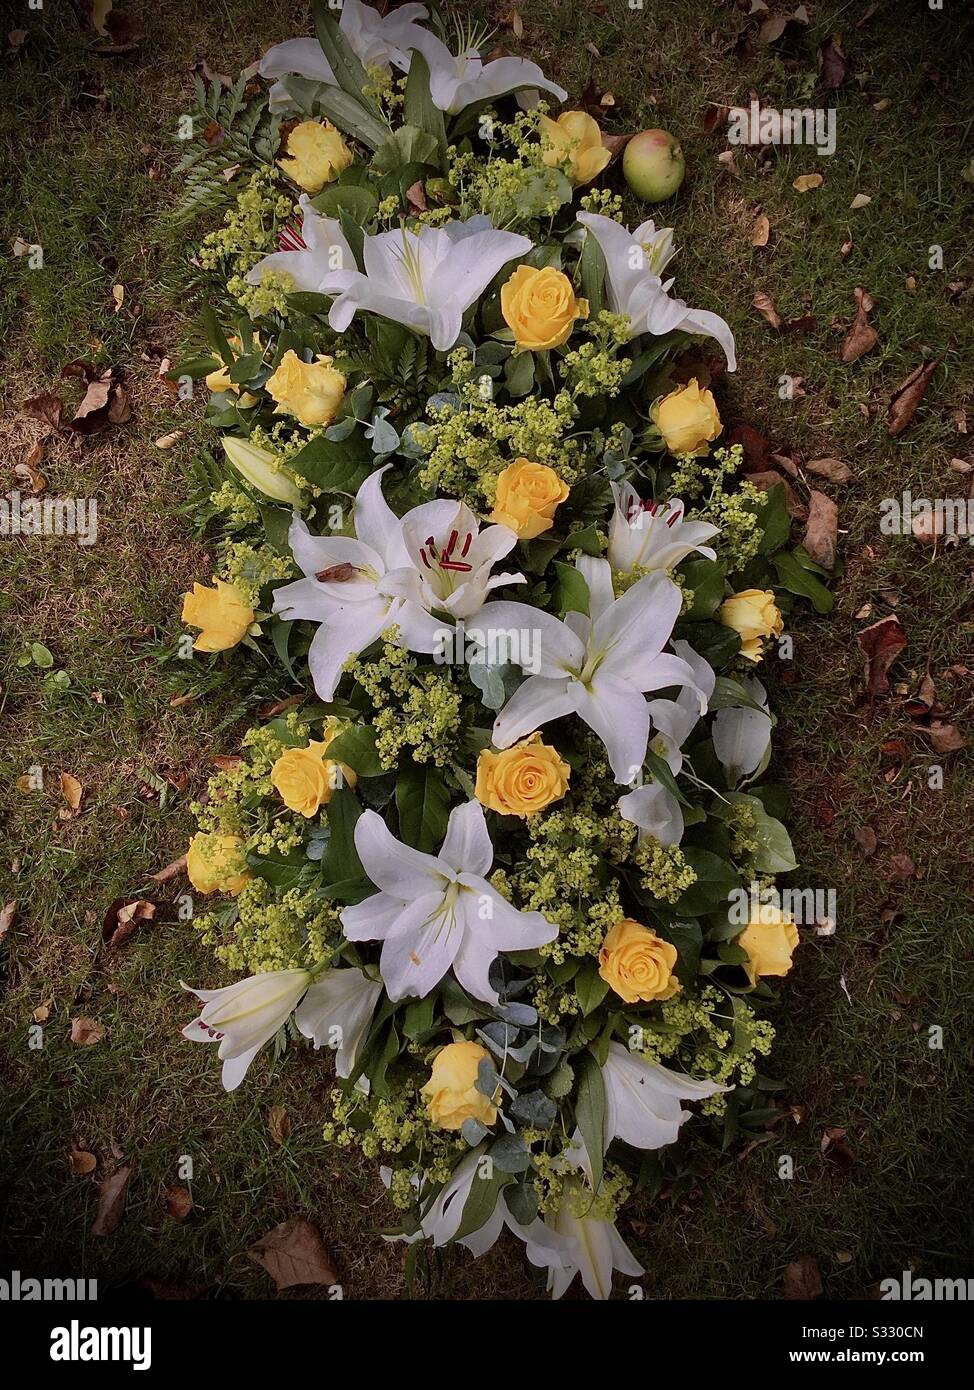 A wreath from a funeral. Stock Photo